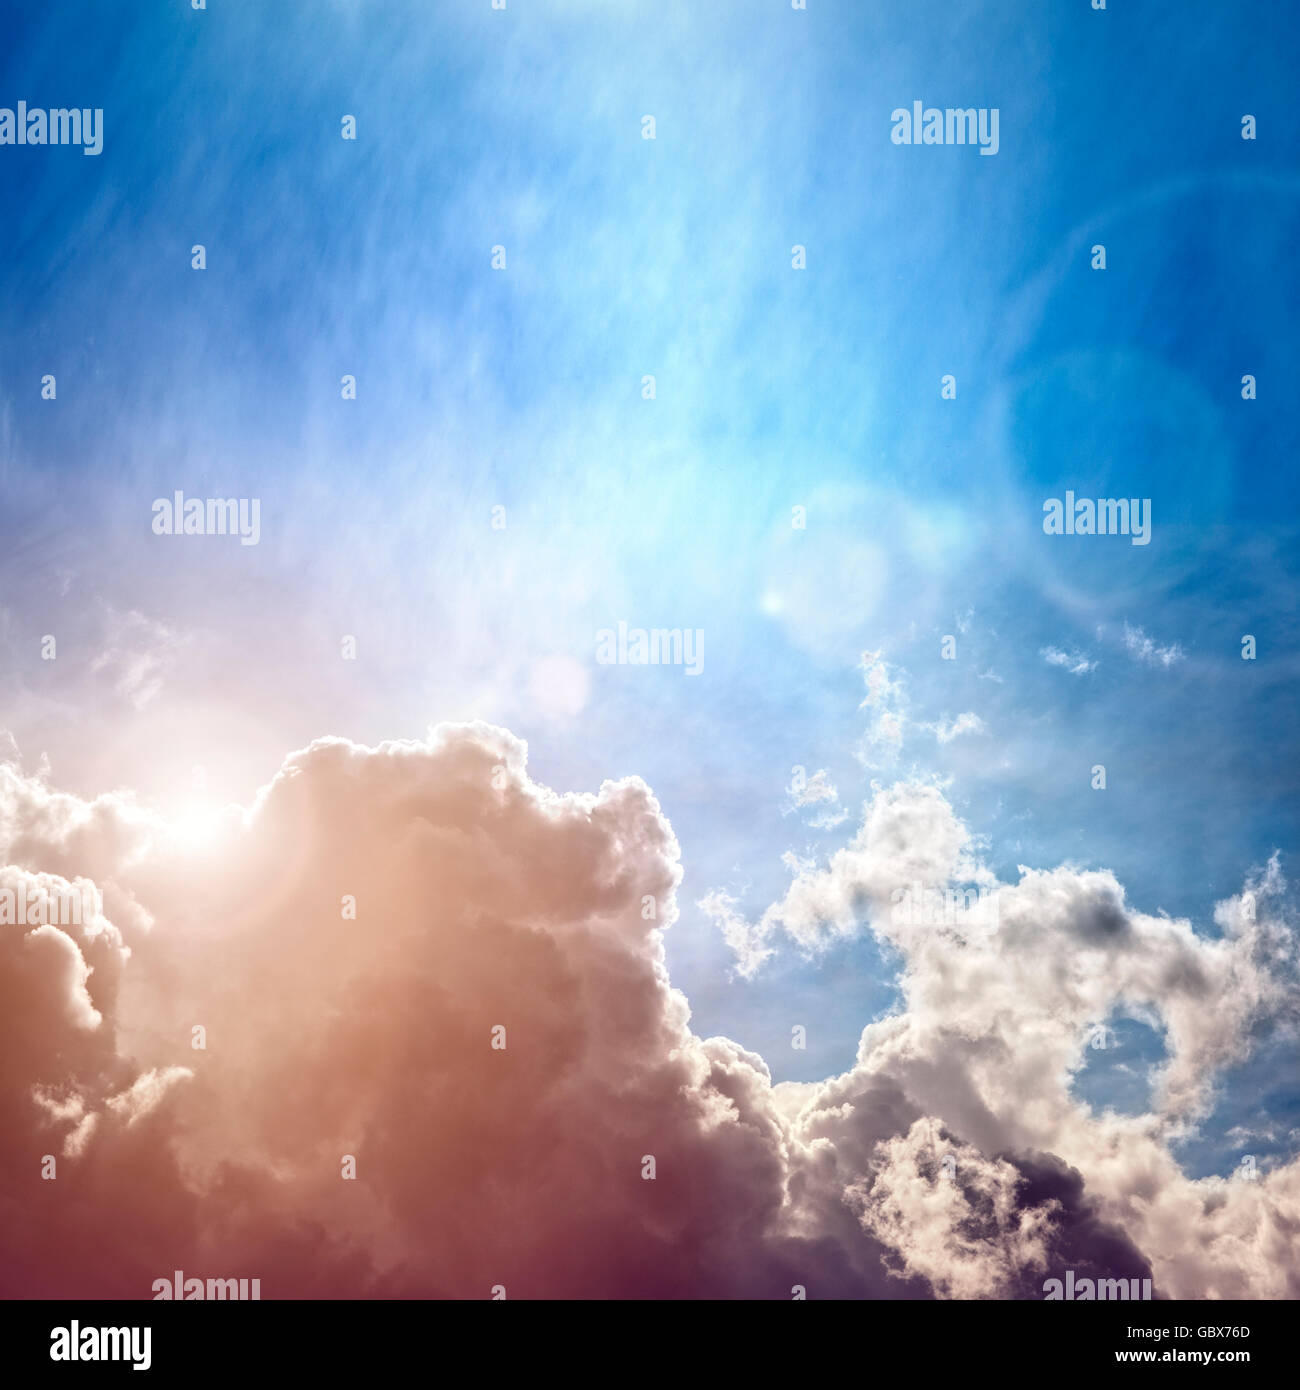 Cloud and sun background concept for nature, environment or religious message Stock Photo